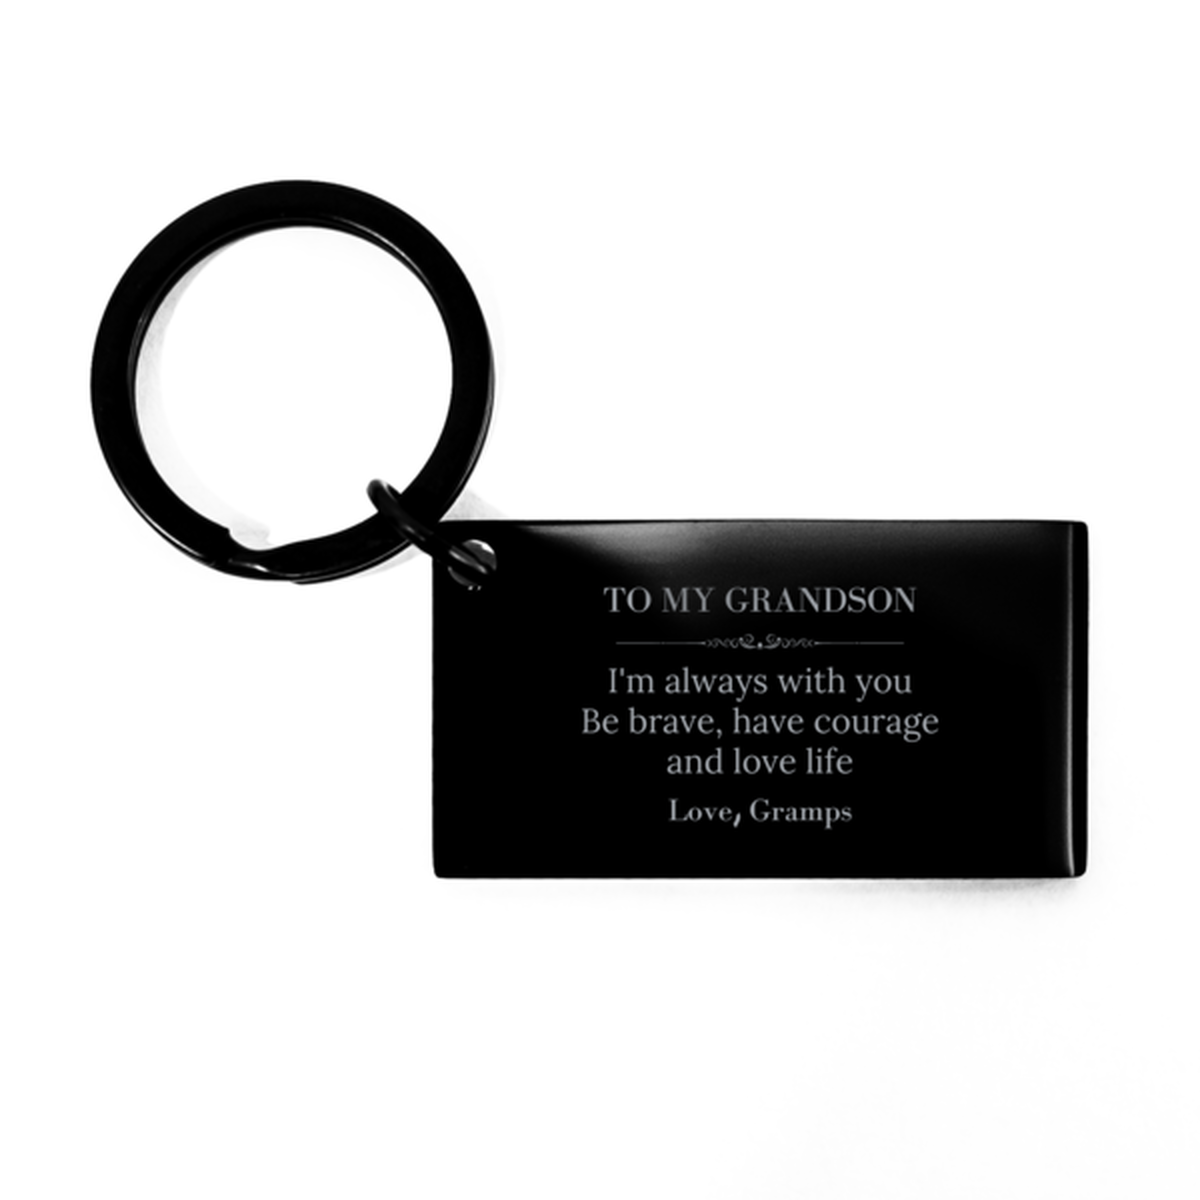 To My Grandson Gifts from Gramps, Unique Keychain Inspirational Christmas Birthday Graduation Gifts for Grandson I'm always with you. Be brave, have courage and love life. Love, Gramps